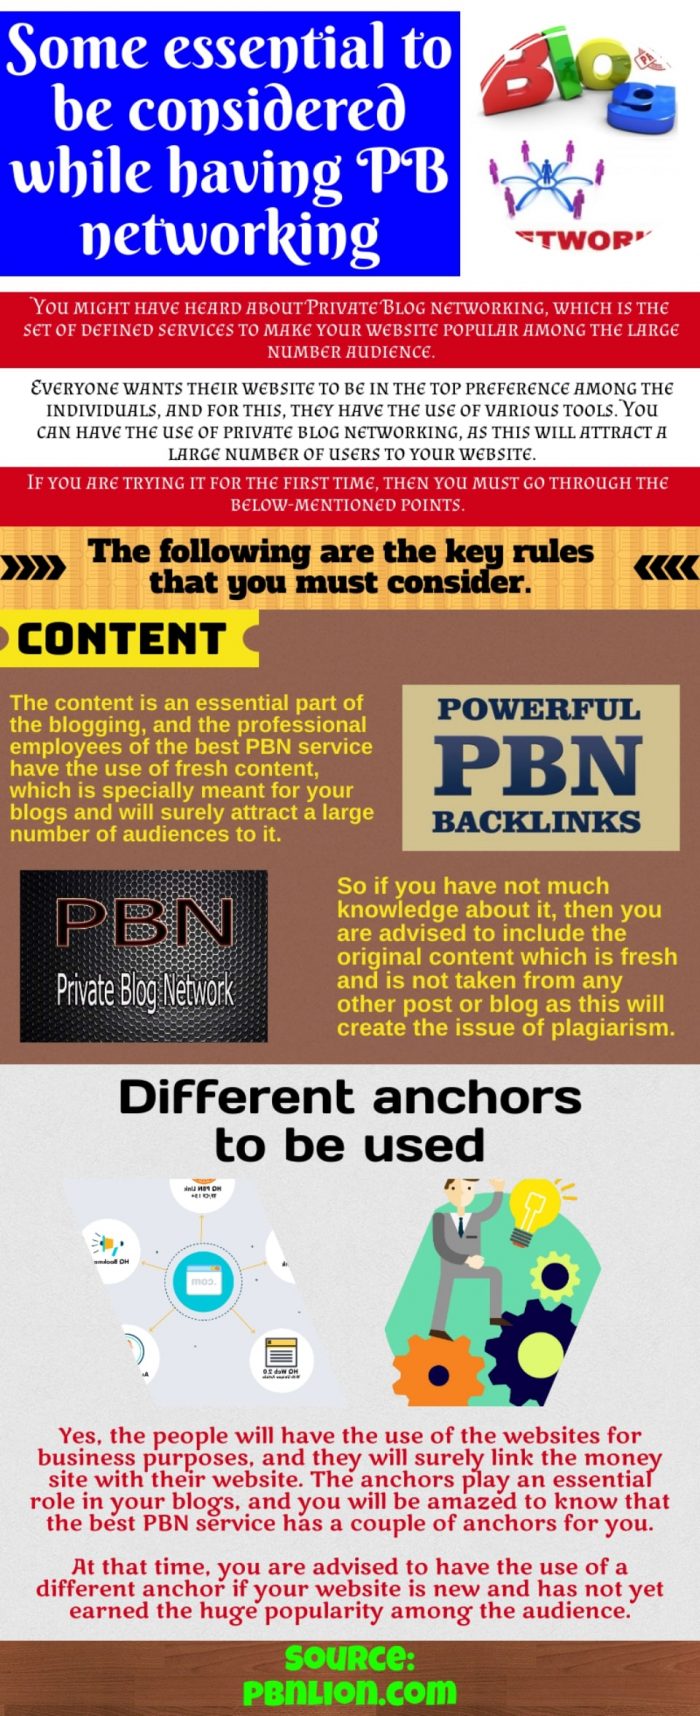 Where Can I Find the Best PBN service